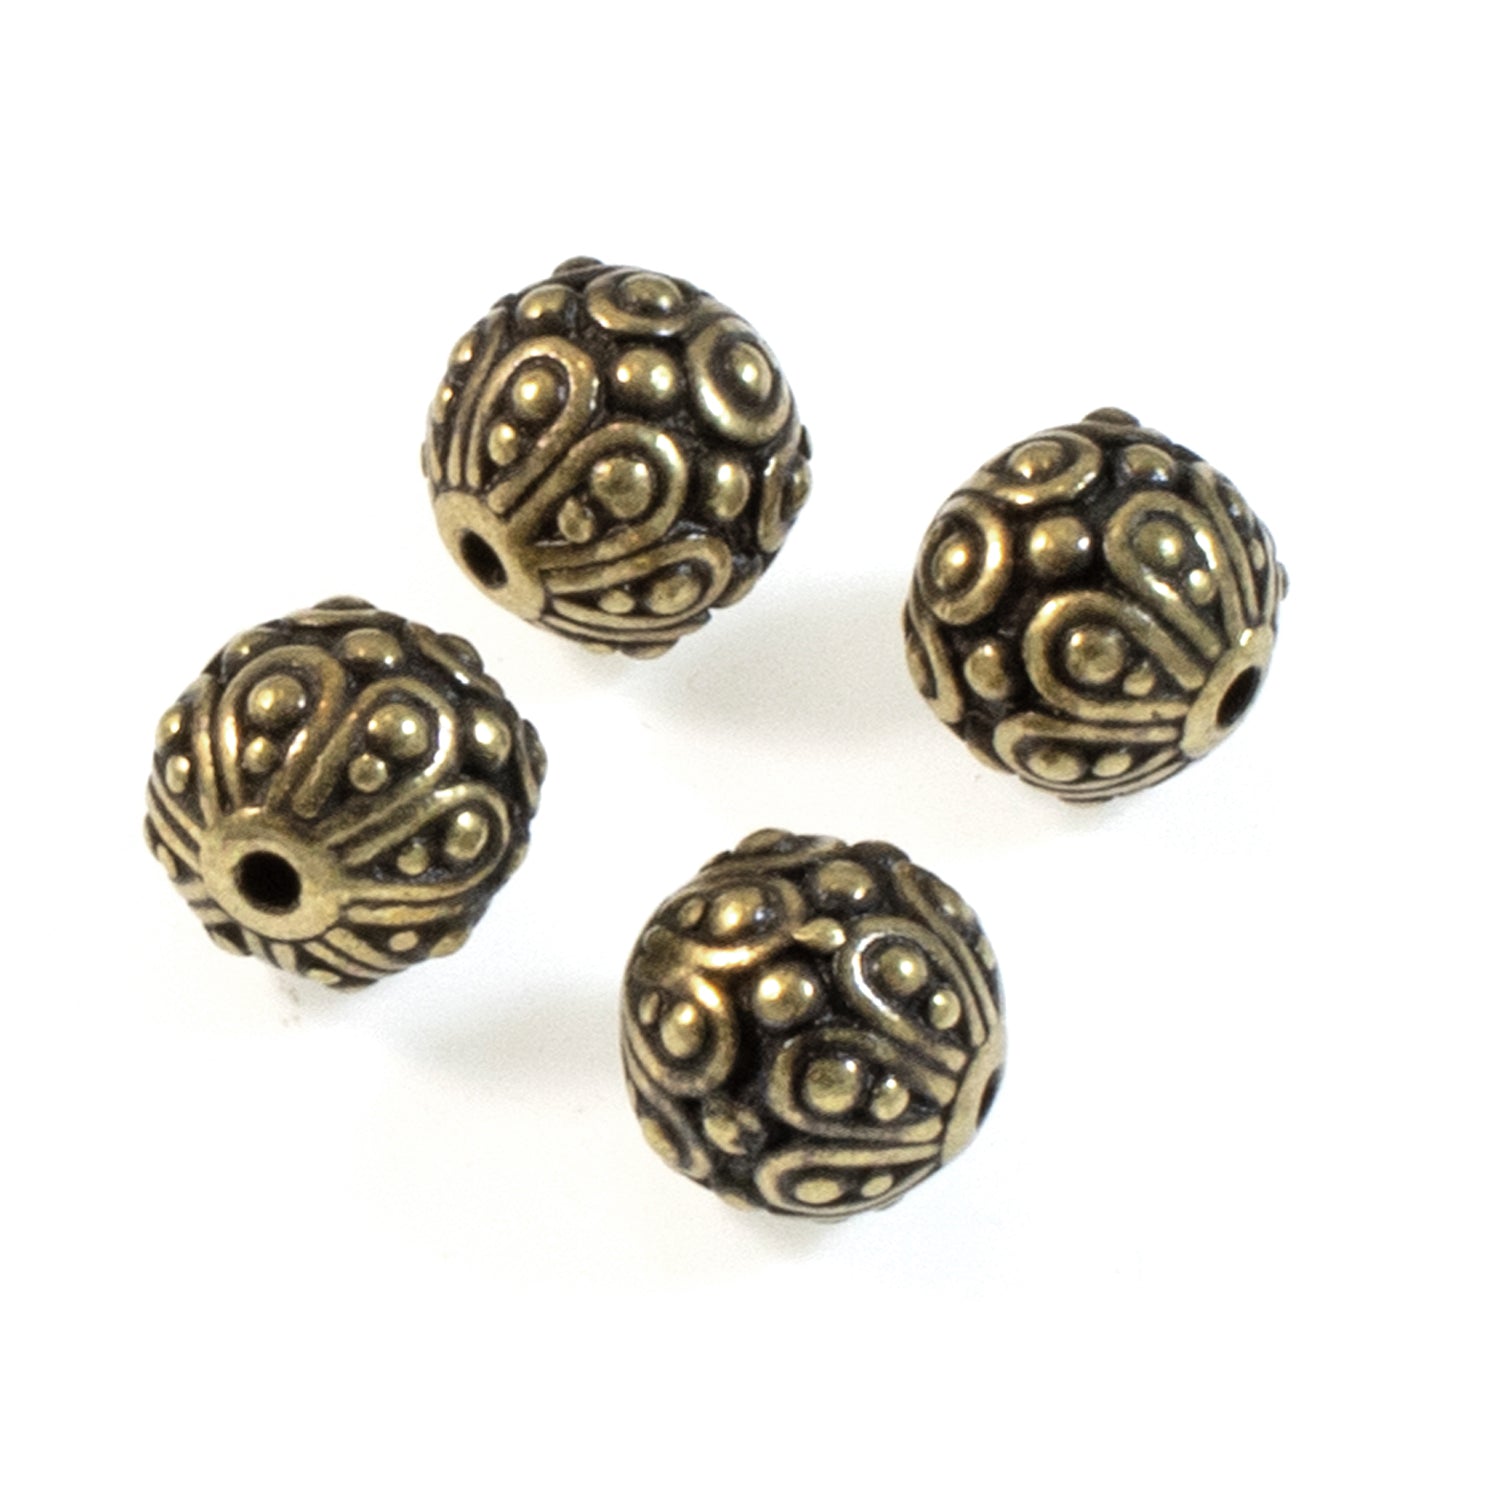 Celtic Beads Antique Copper Beads 9mm X 7mm Tierracast Endless Beads Celtic  Knotwork Eternity Beads P818 